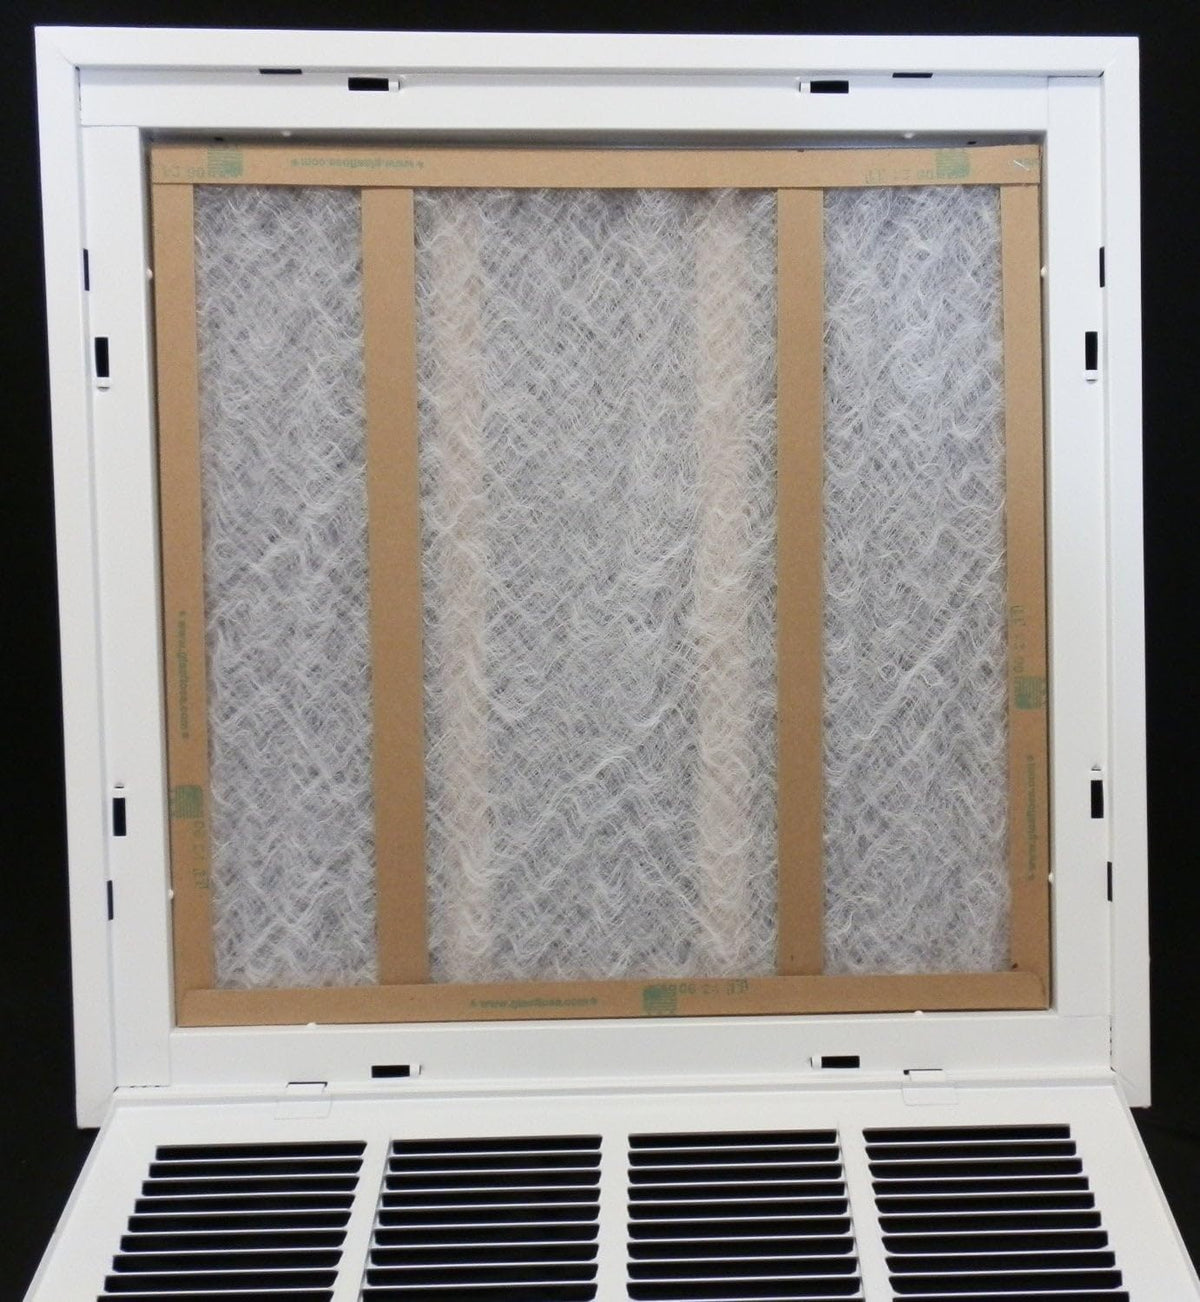 12&quot; X 26&quot; Steel Return Air Filter Grille for 1&quot; Filter - Removable Frame - [Outer Dimensions: 14 5/8&quot; X 28 5/8&quot;]